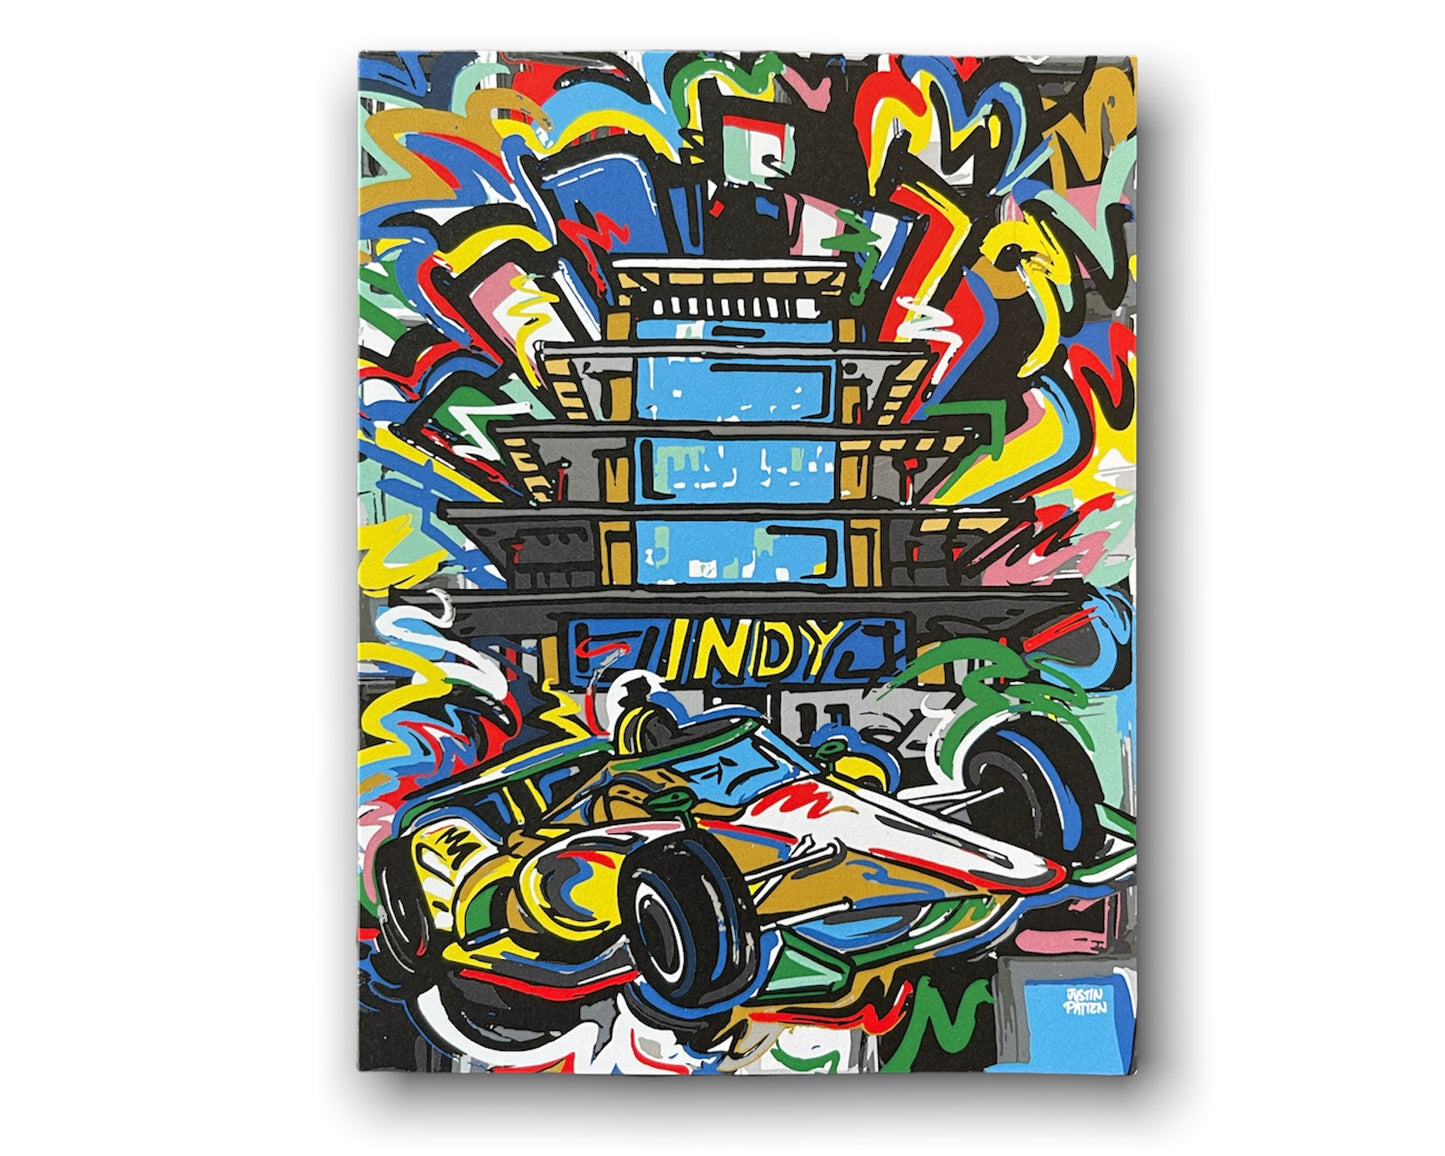 Indianapolis Motor Speedway Note Cards by Justin Patten (Pack of 6 Cards)